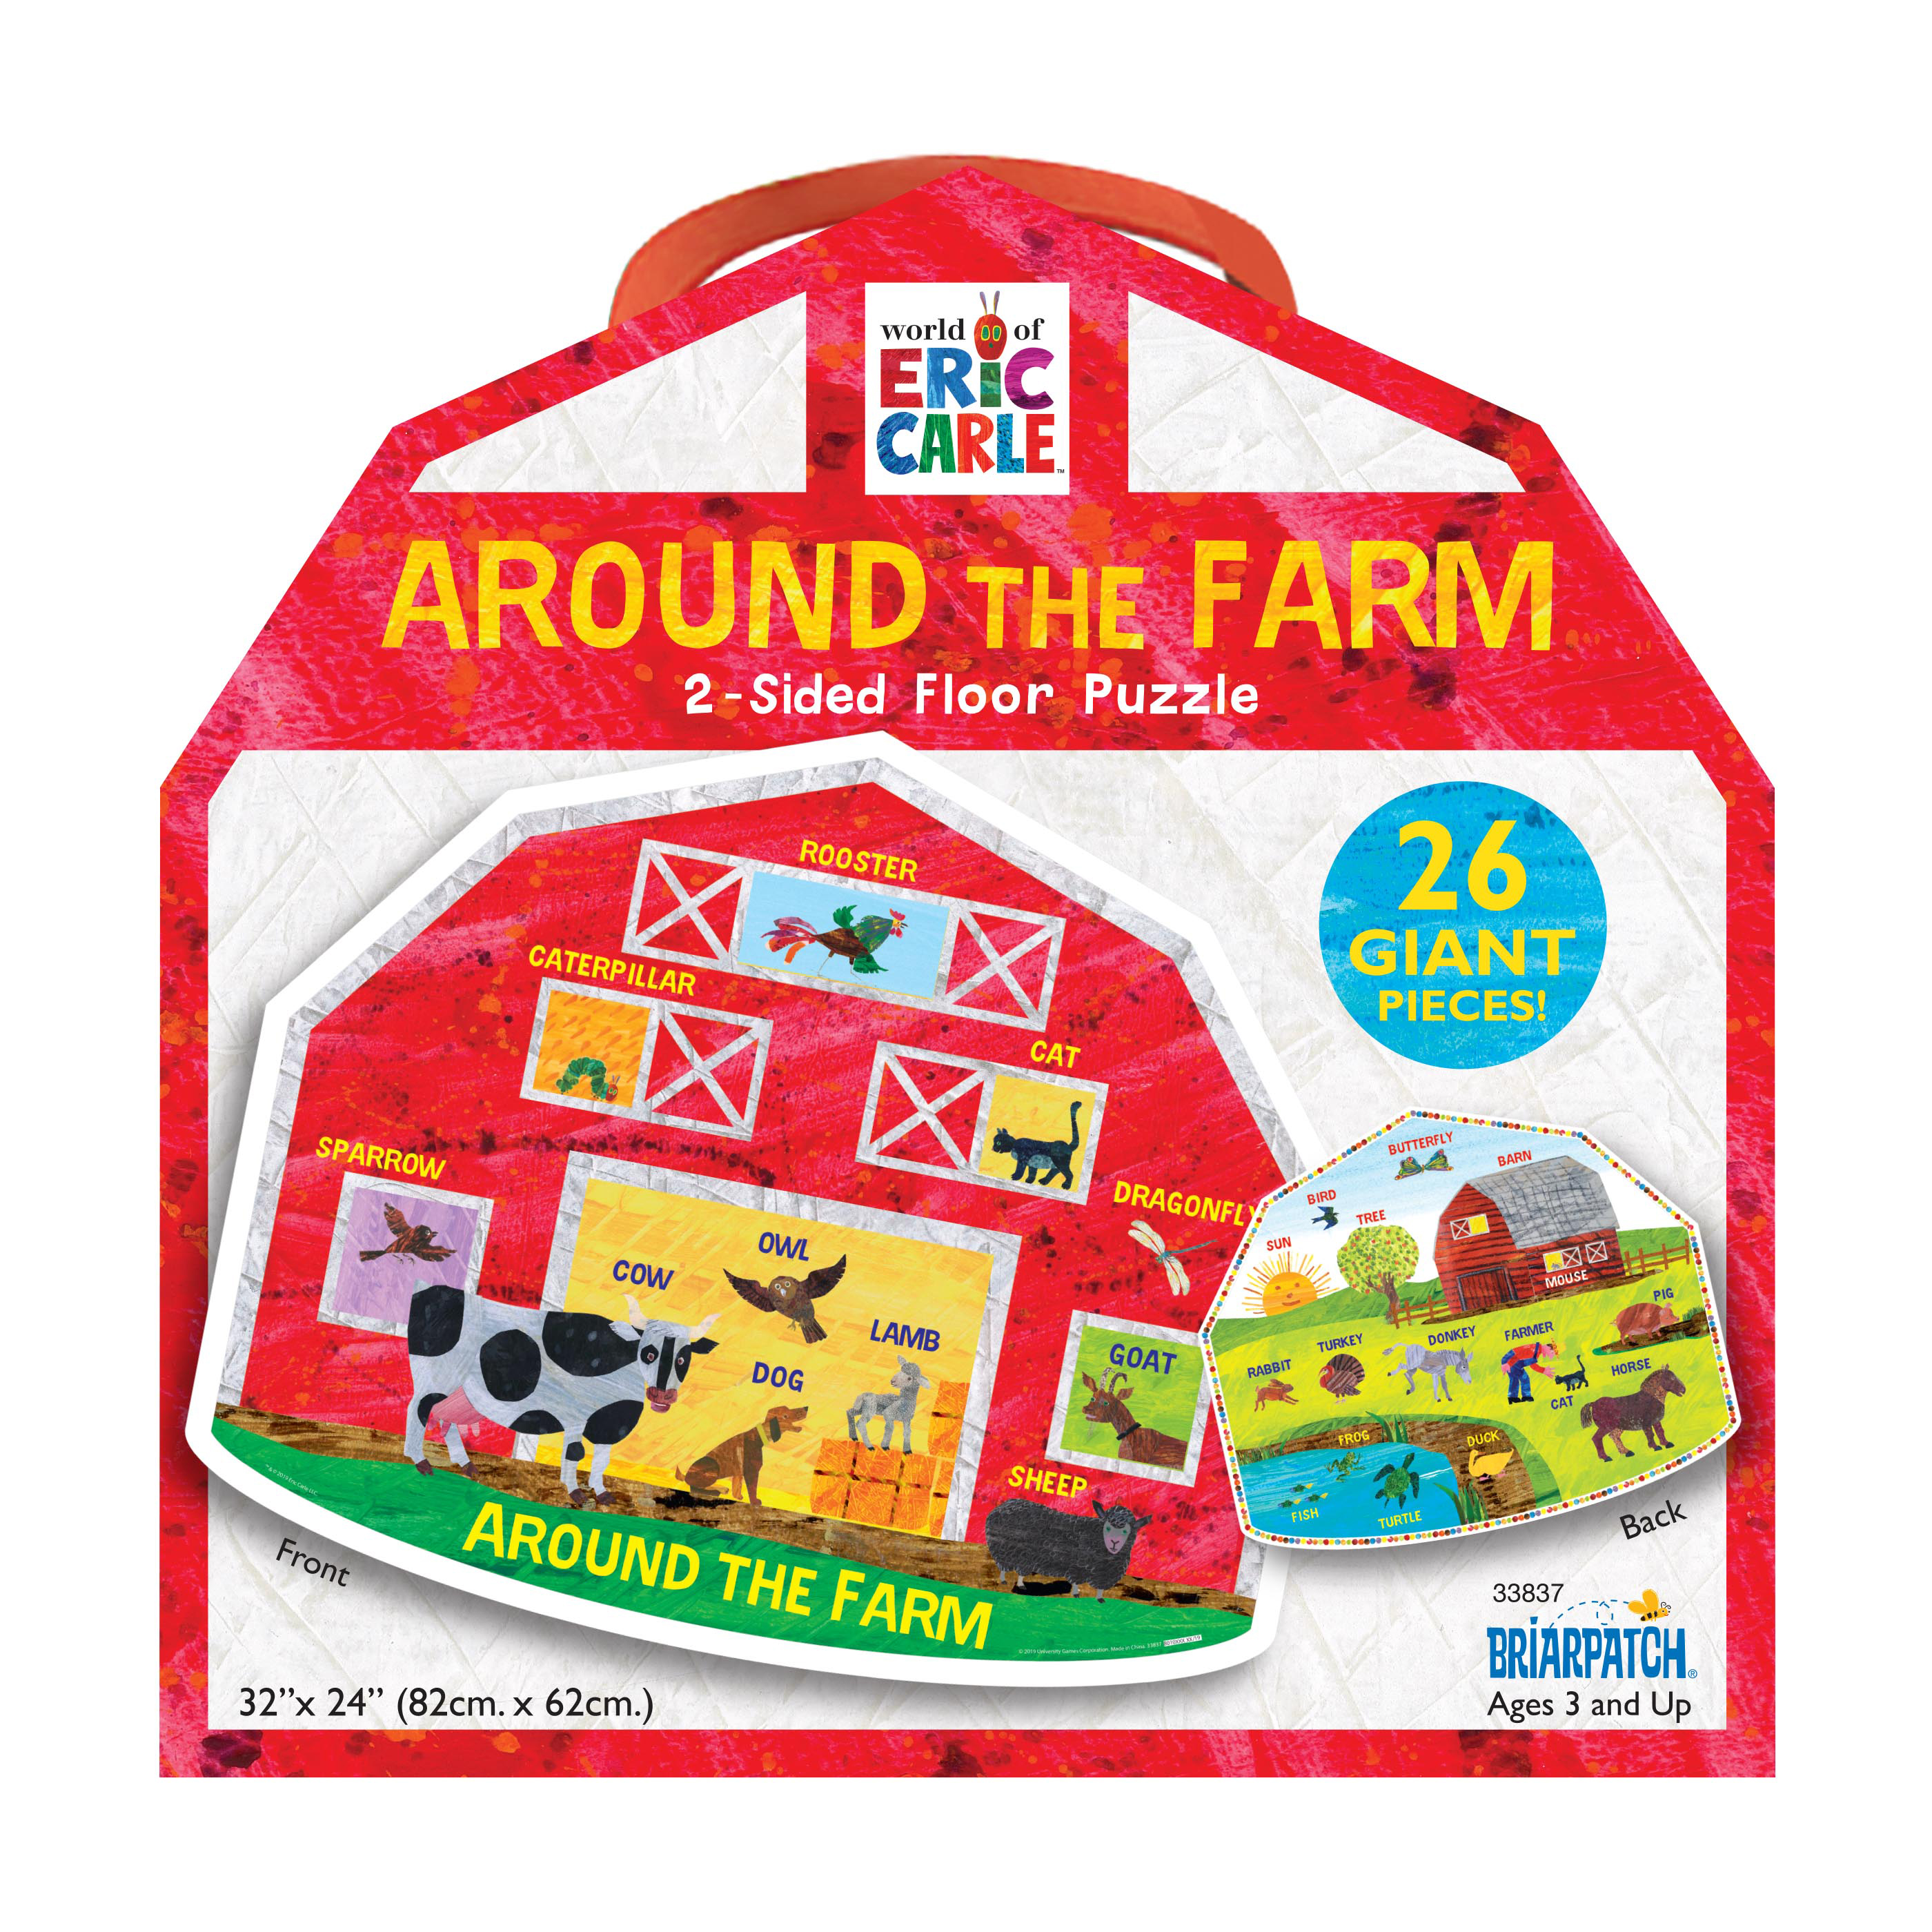 Briarpatch The World of Eric Carle - Around the Farm 2-Sided Floor Puzzle: 26 Pcs